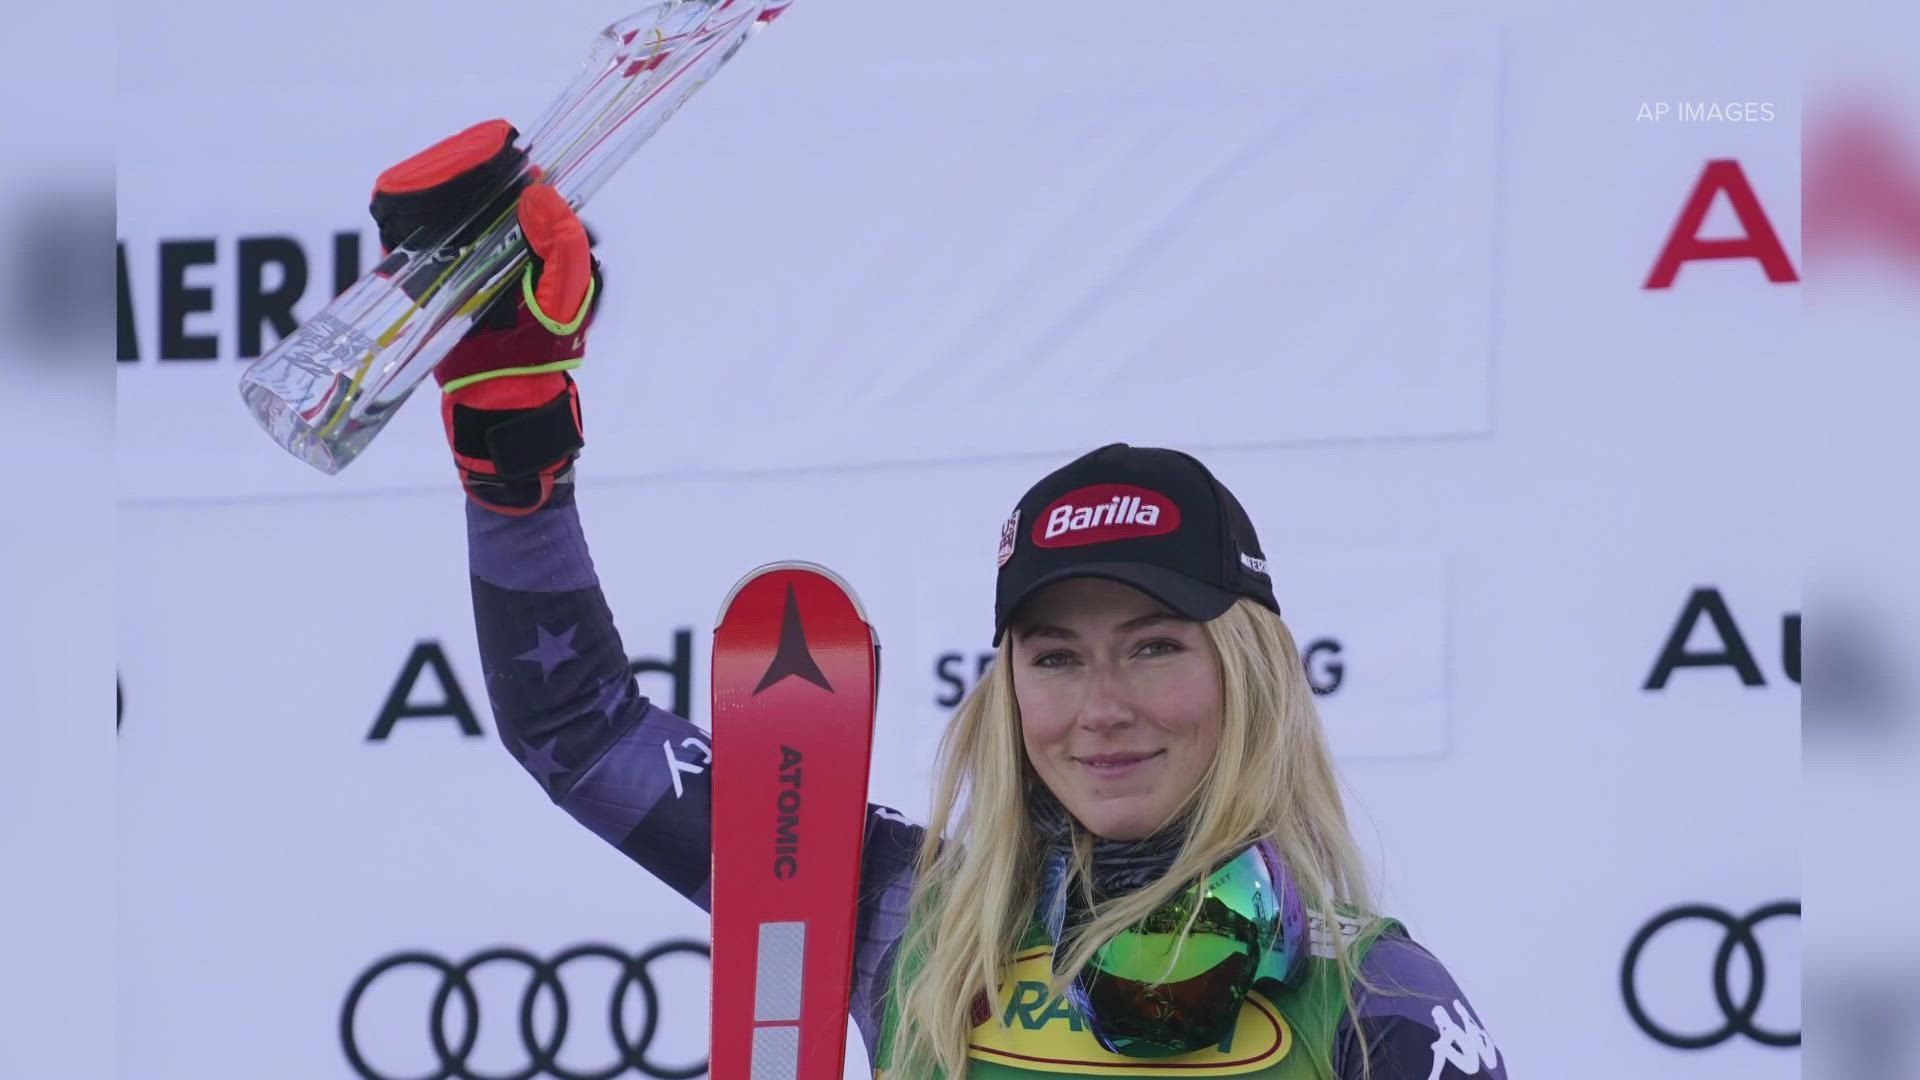 The result marked Shiffrin’s fourth World Cup win of the season and 78th overall, leaving her four short of the women’s record set by Lindsey Vonn.